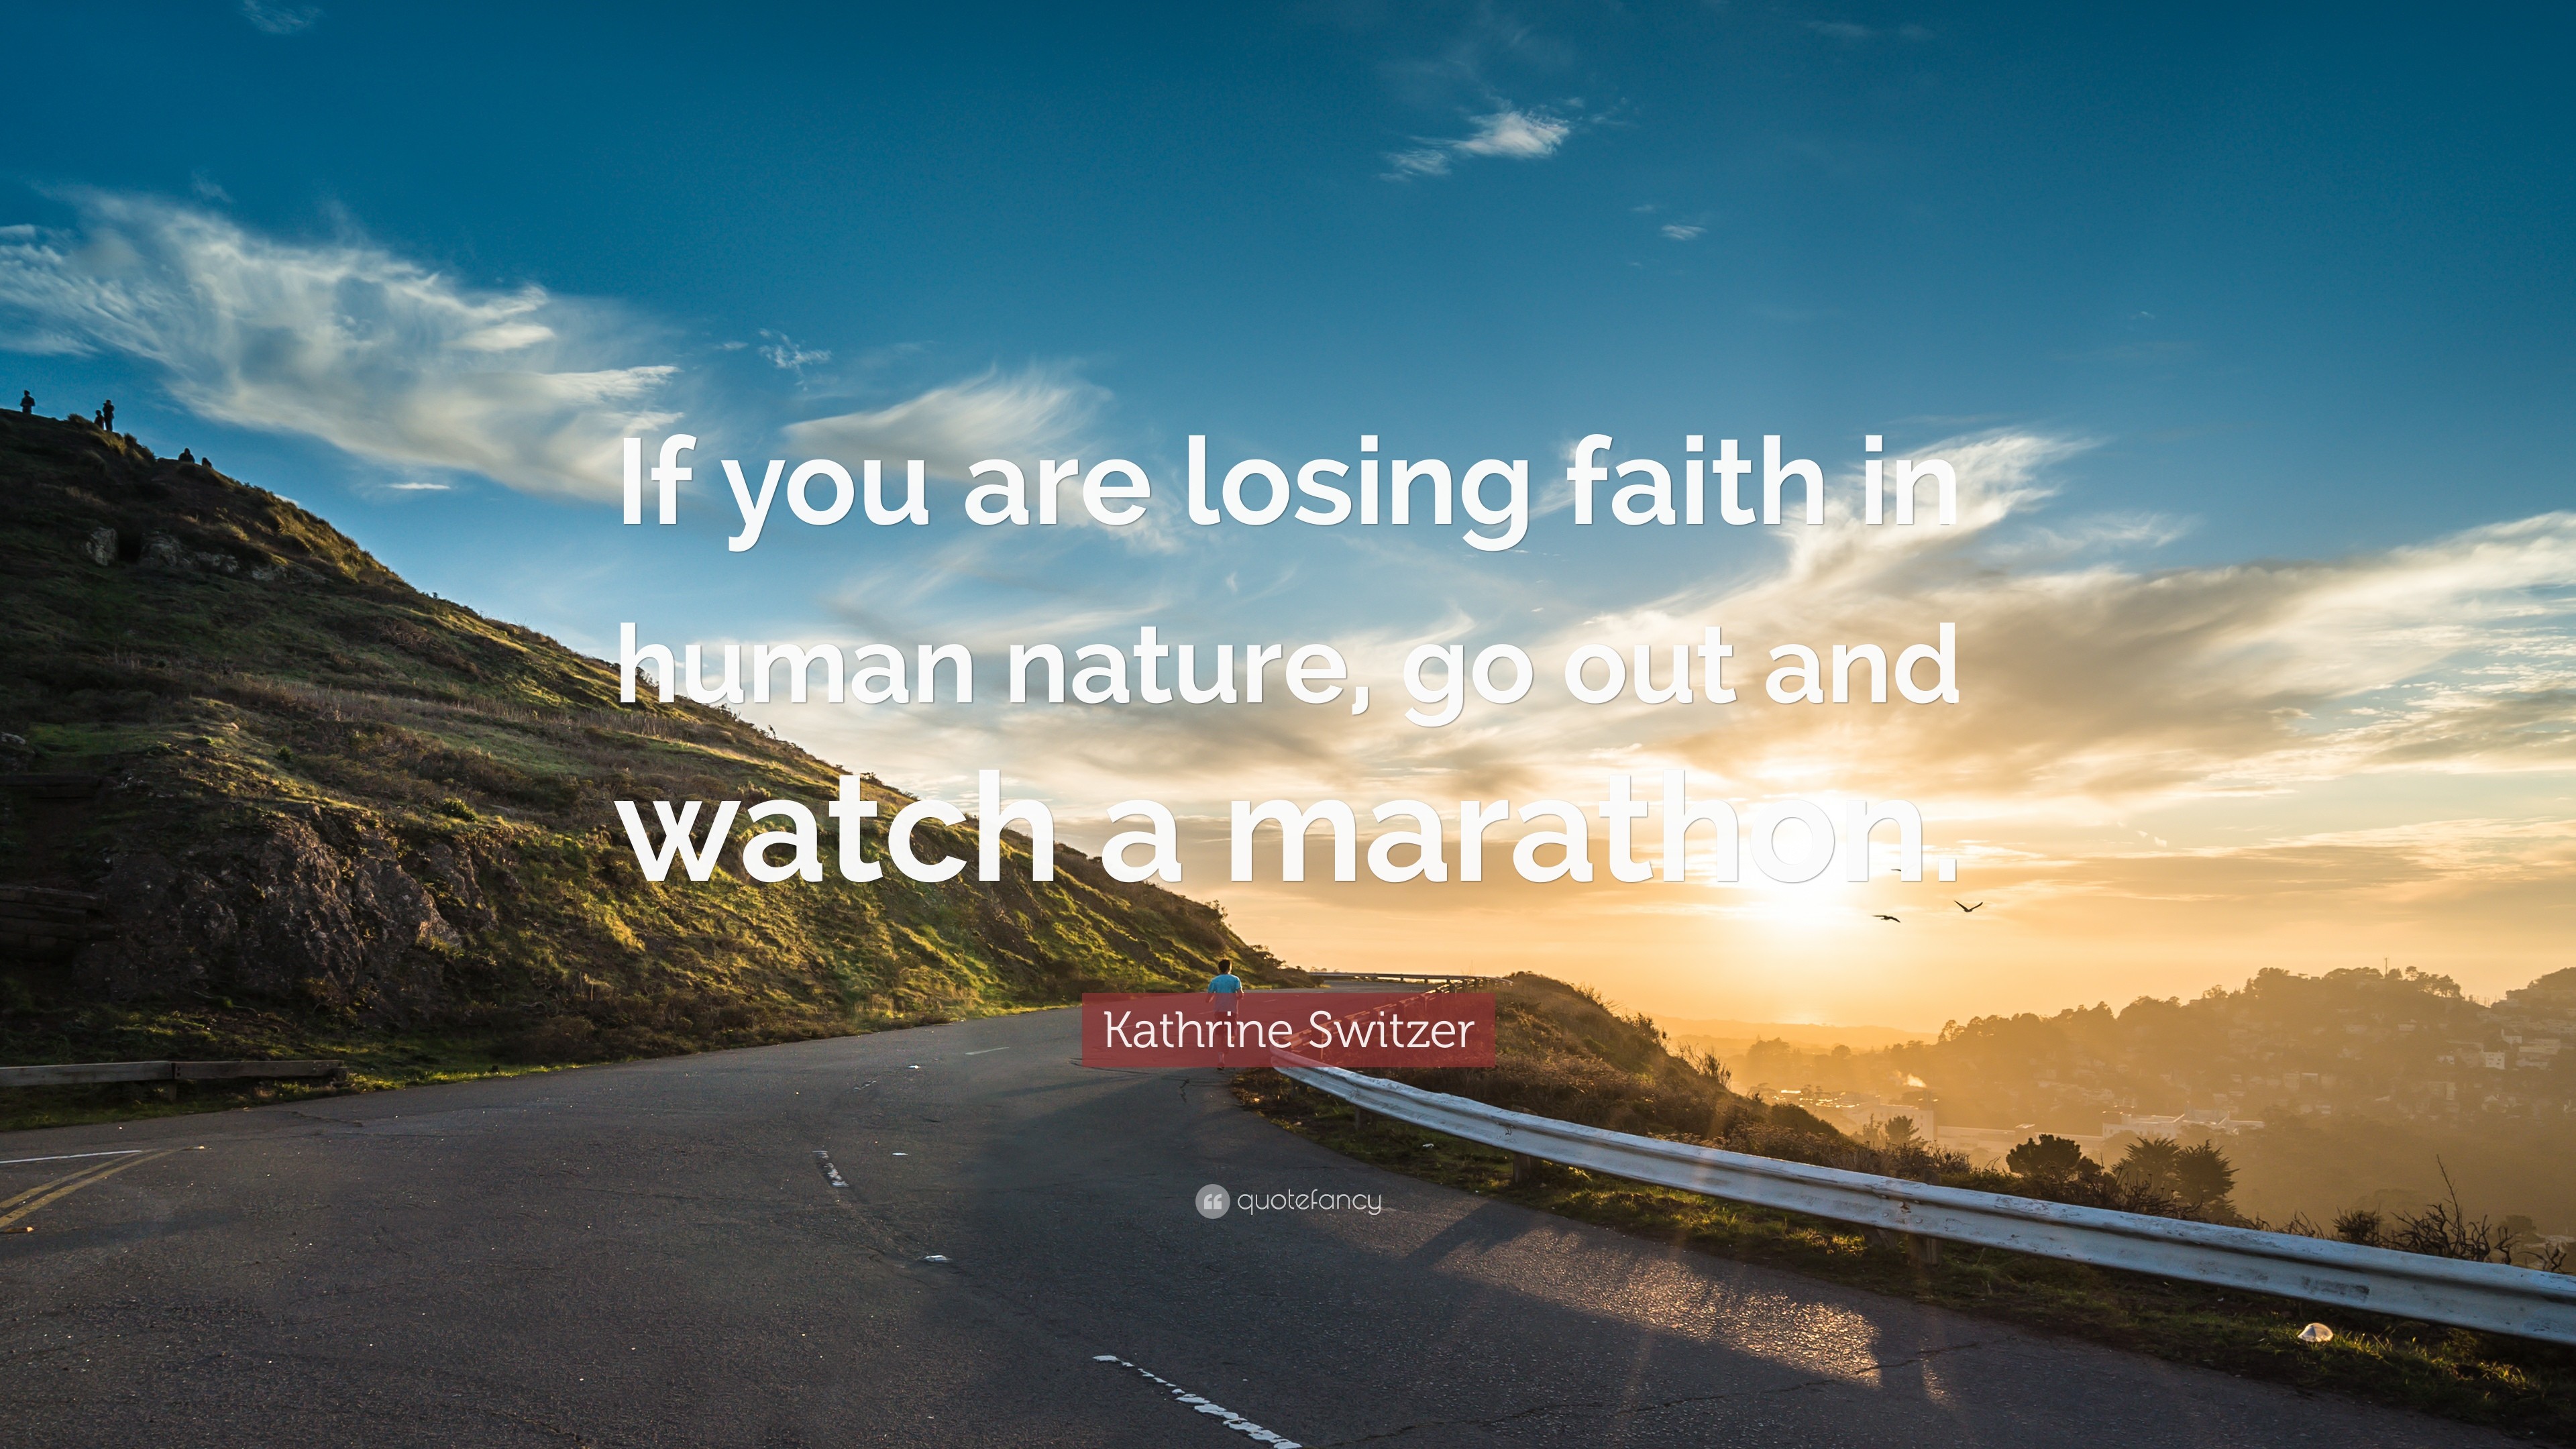 3840x2160 Running Quotes: “If you are losing faith in human nature, go out and